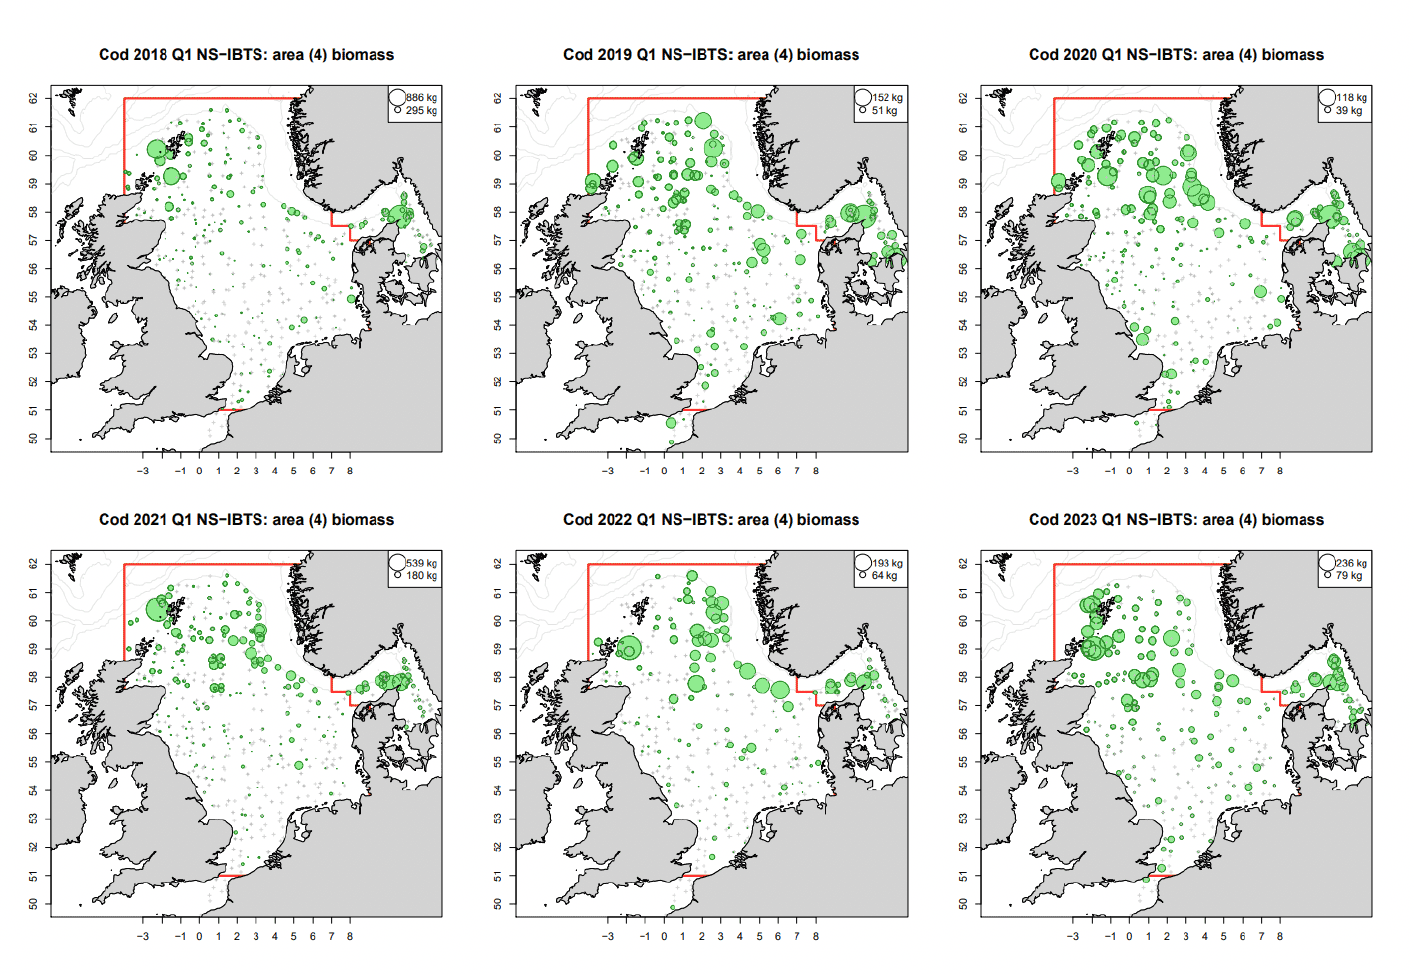 Distribution map for survey cod biomass in Quarter 1 in the North Sea (area 4). There are 6 bubble plots one per year (2018-2023). The plots indicate larger biomass bubbles in the northern North Sea.